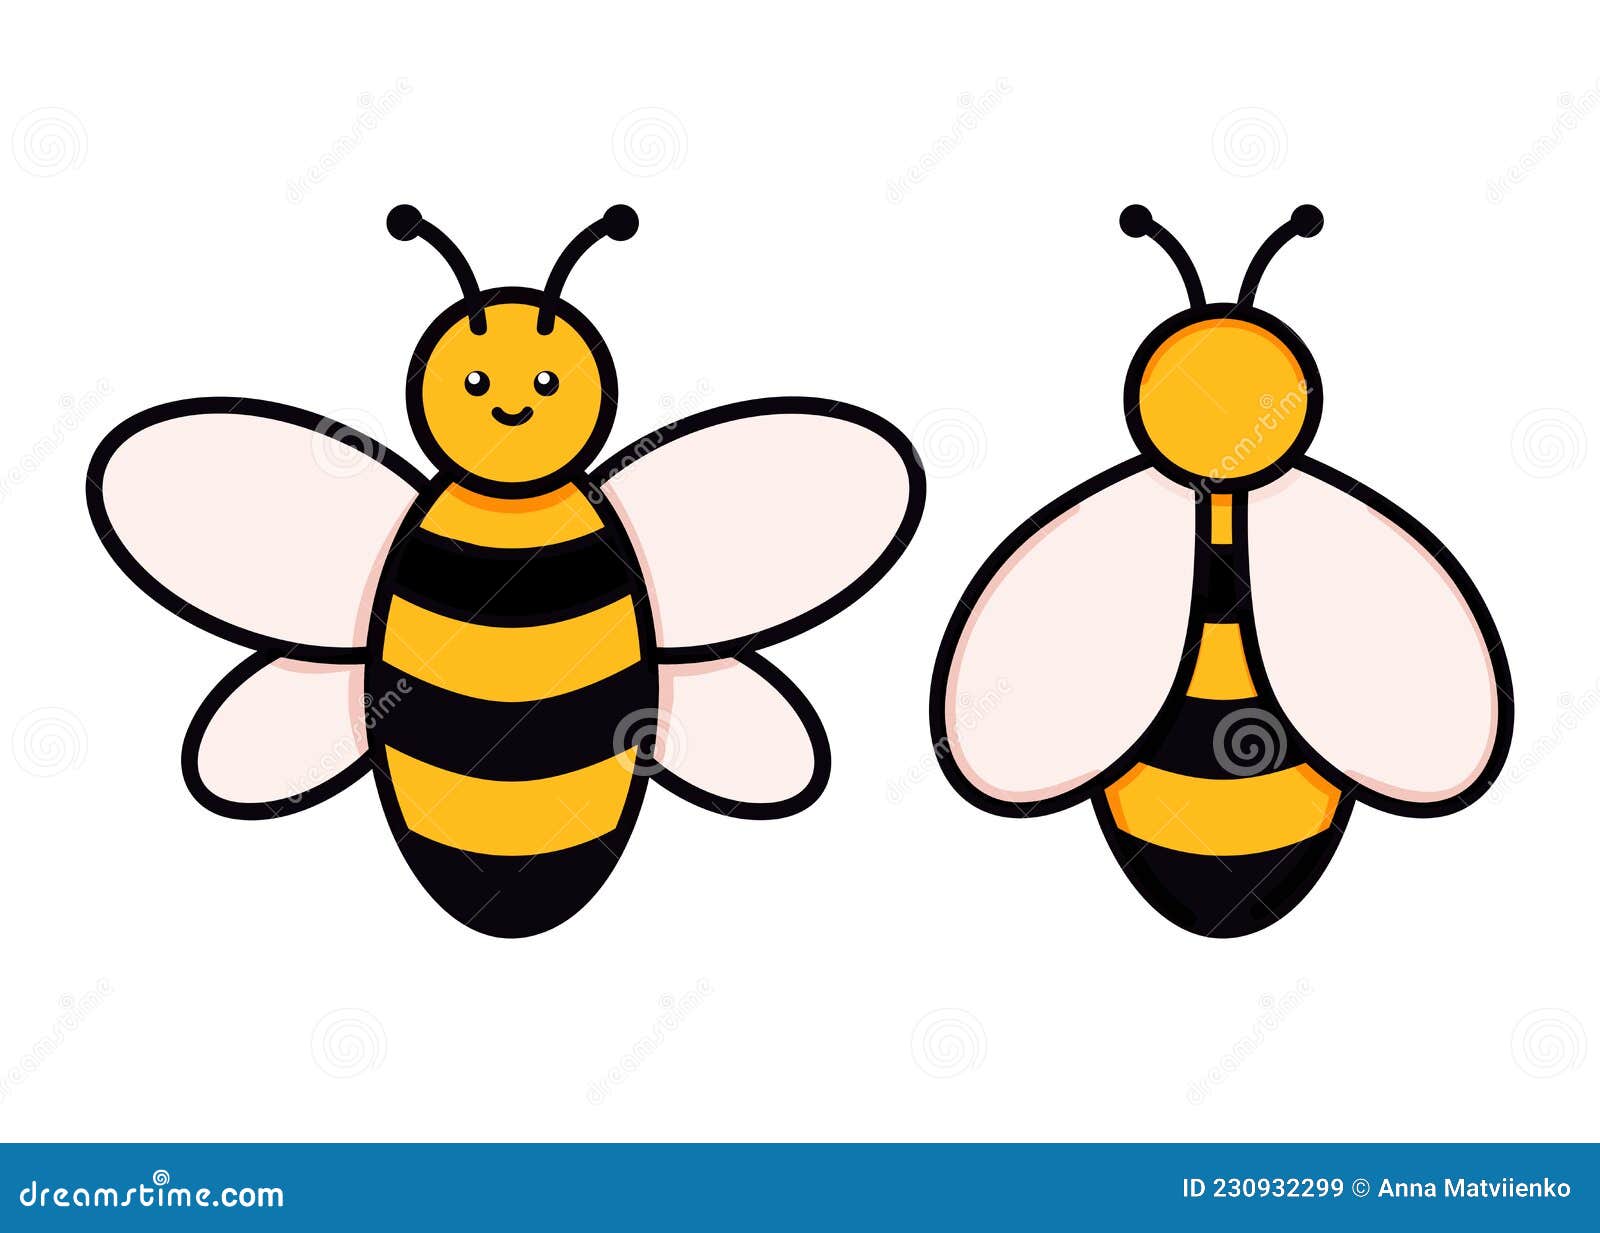 How to Draw Cartoon Bumblebees or Bees with Easy Step by Step Drawing  Tutorial | How to Draw Step by Step Drawing Tutorials